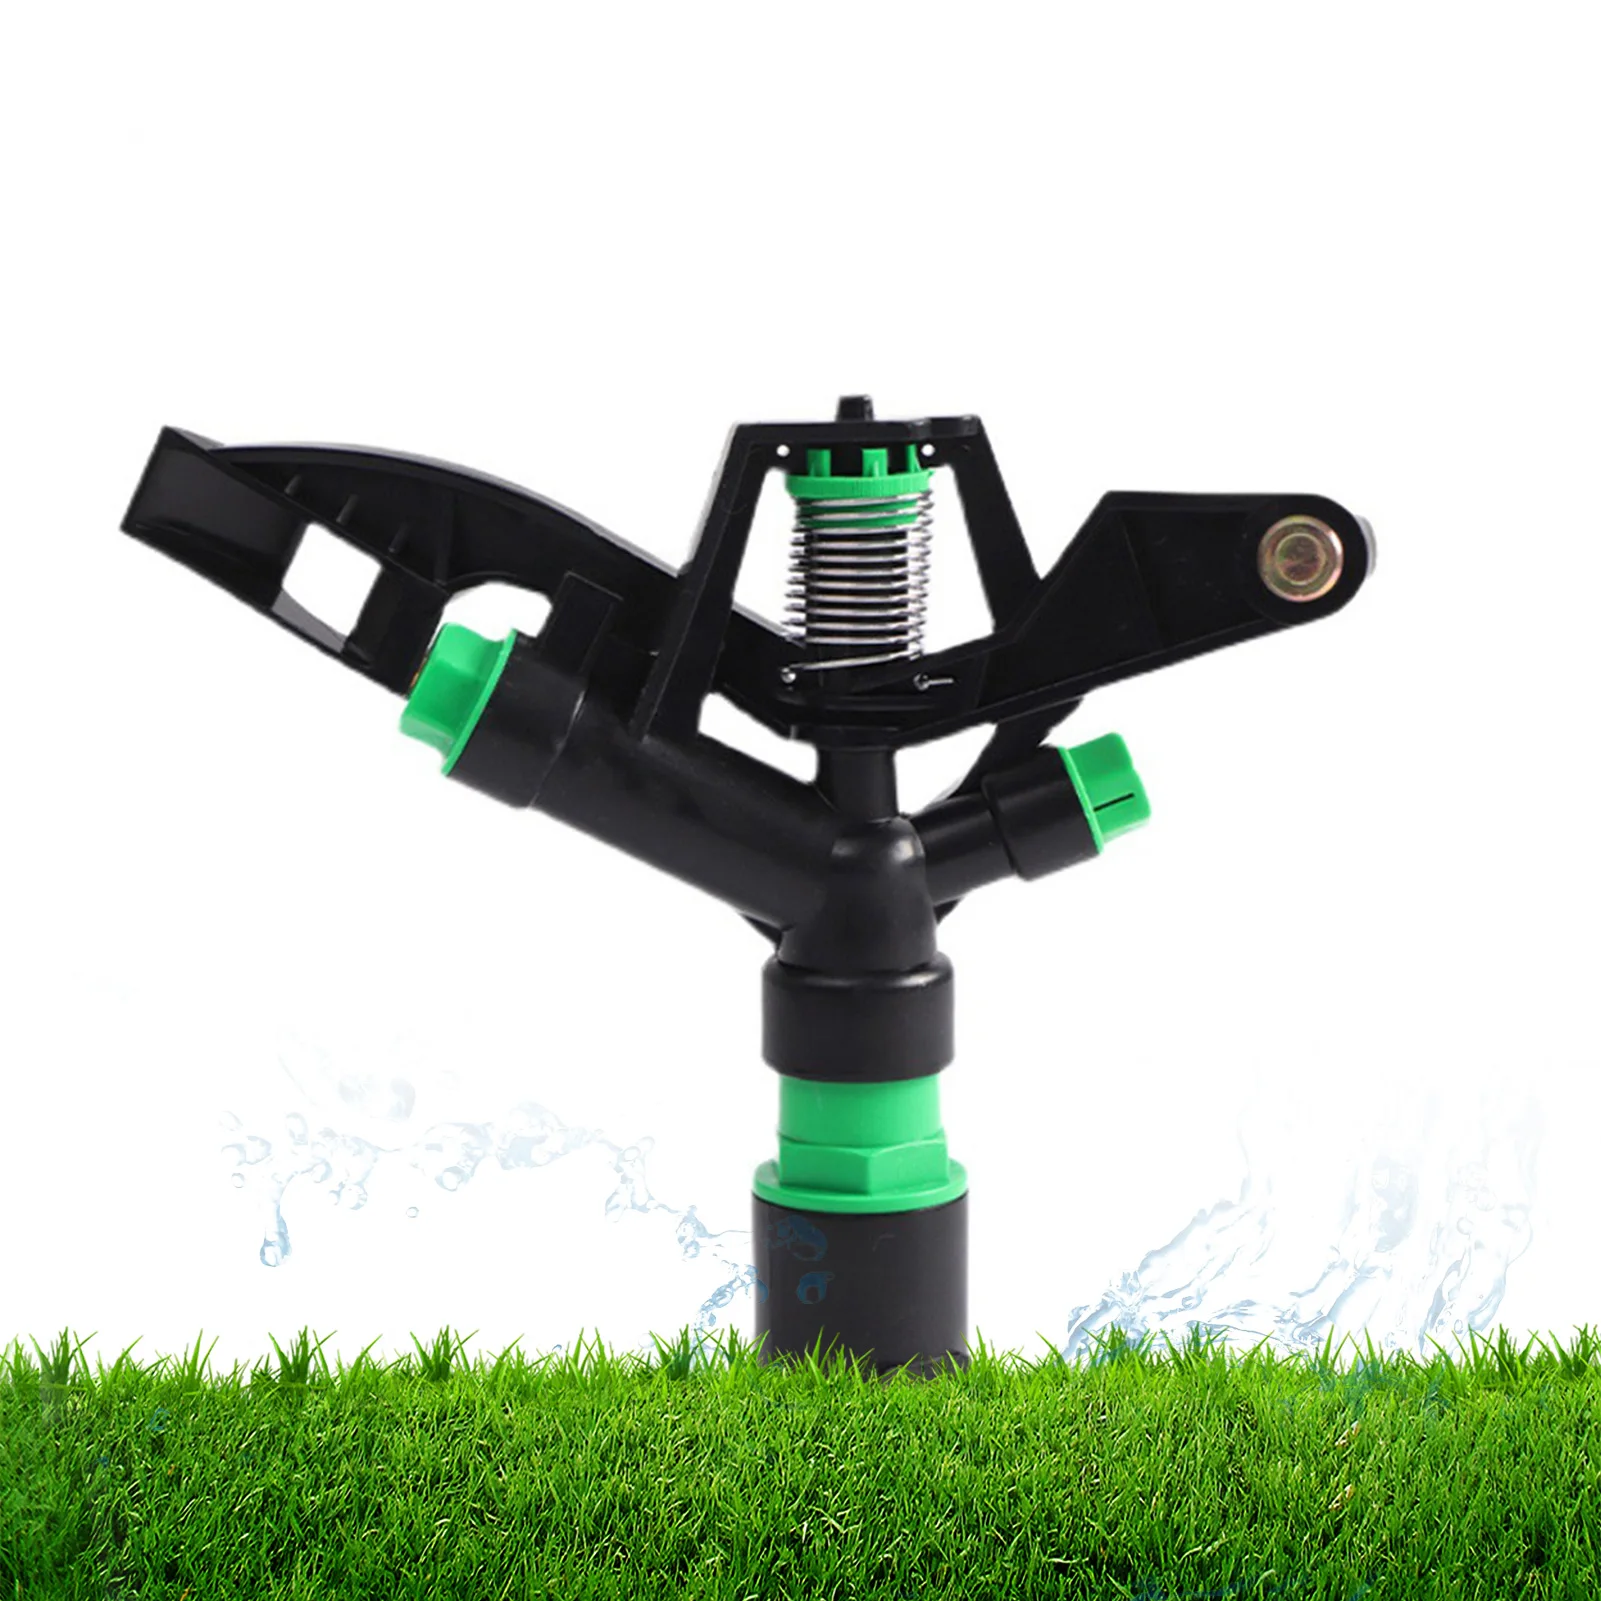 

Adjustable Rocker Sprinkler Agriculture Watering Nozzle Controllable Rotating Sprinklers 360 Degrees Rotating Jet Nozzles